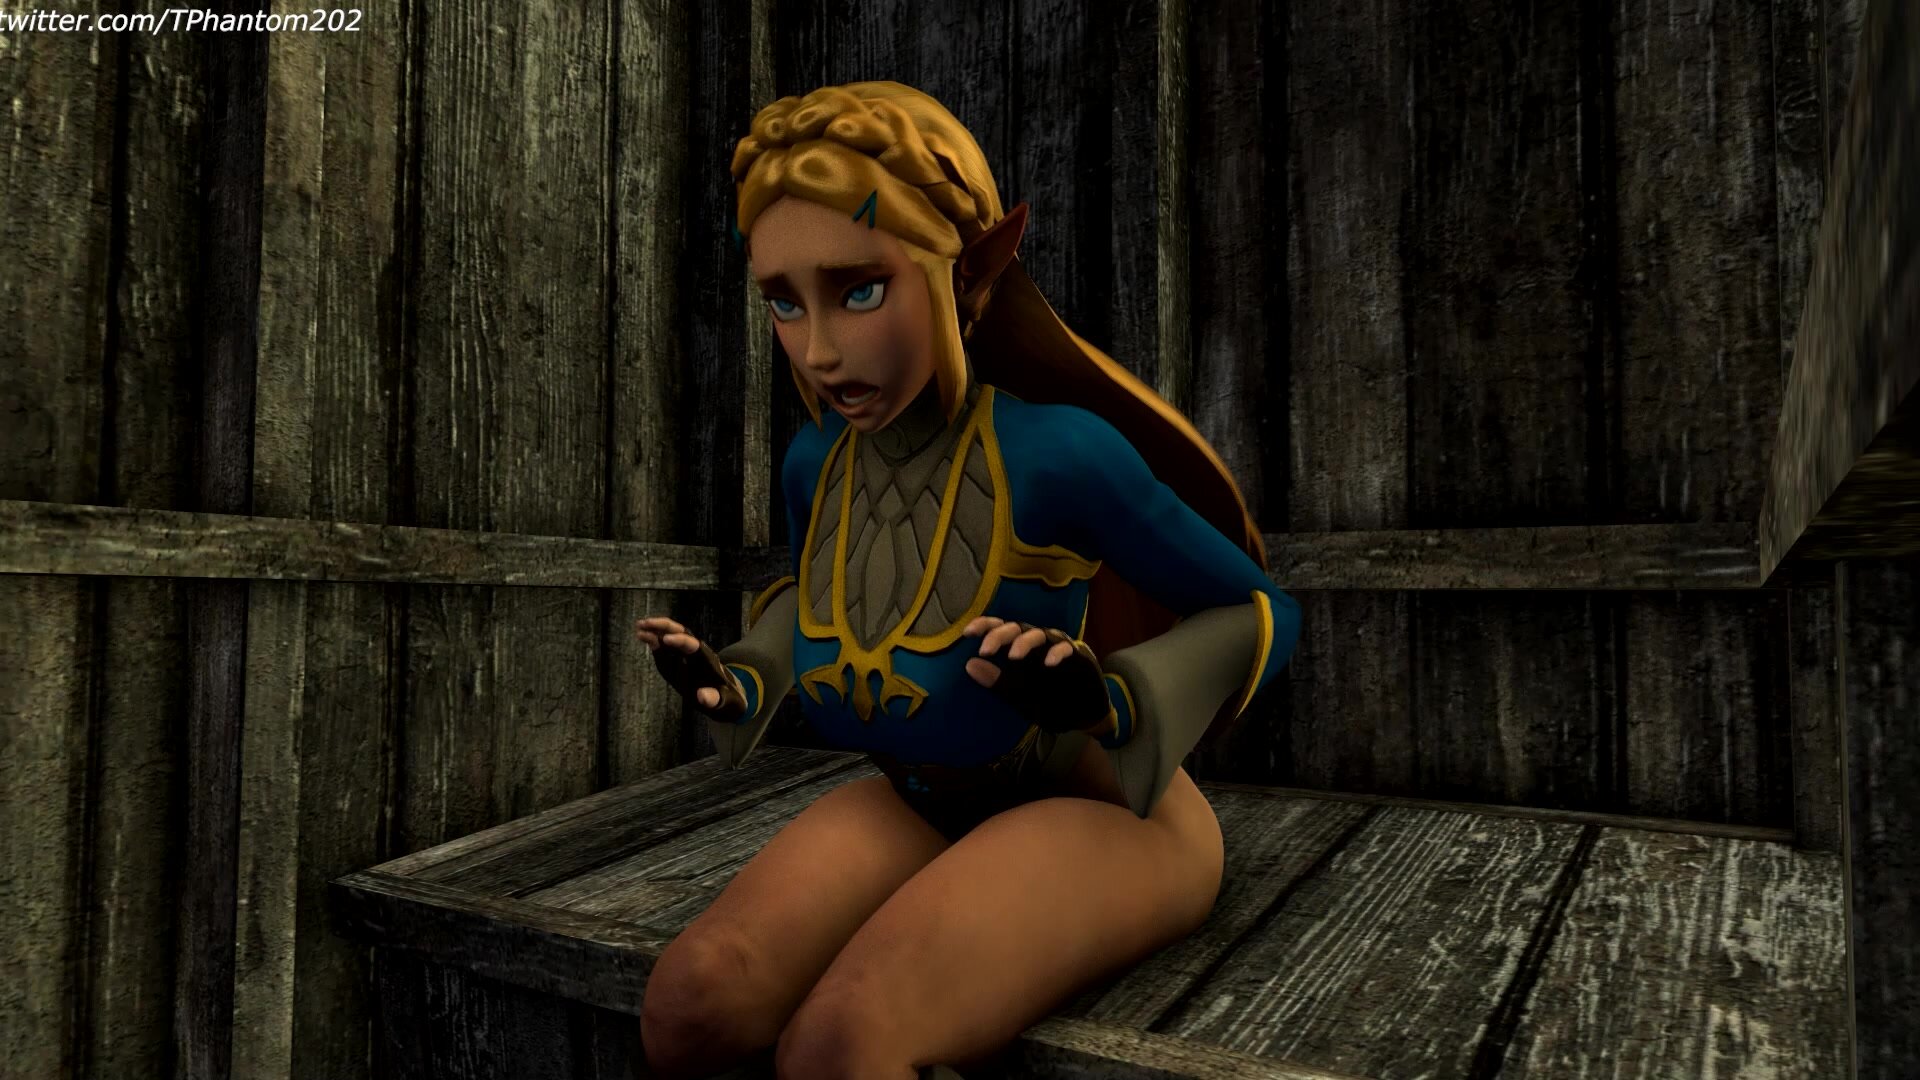 BOTW Zelda Bombs an Outhouse